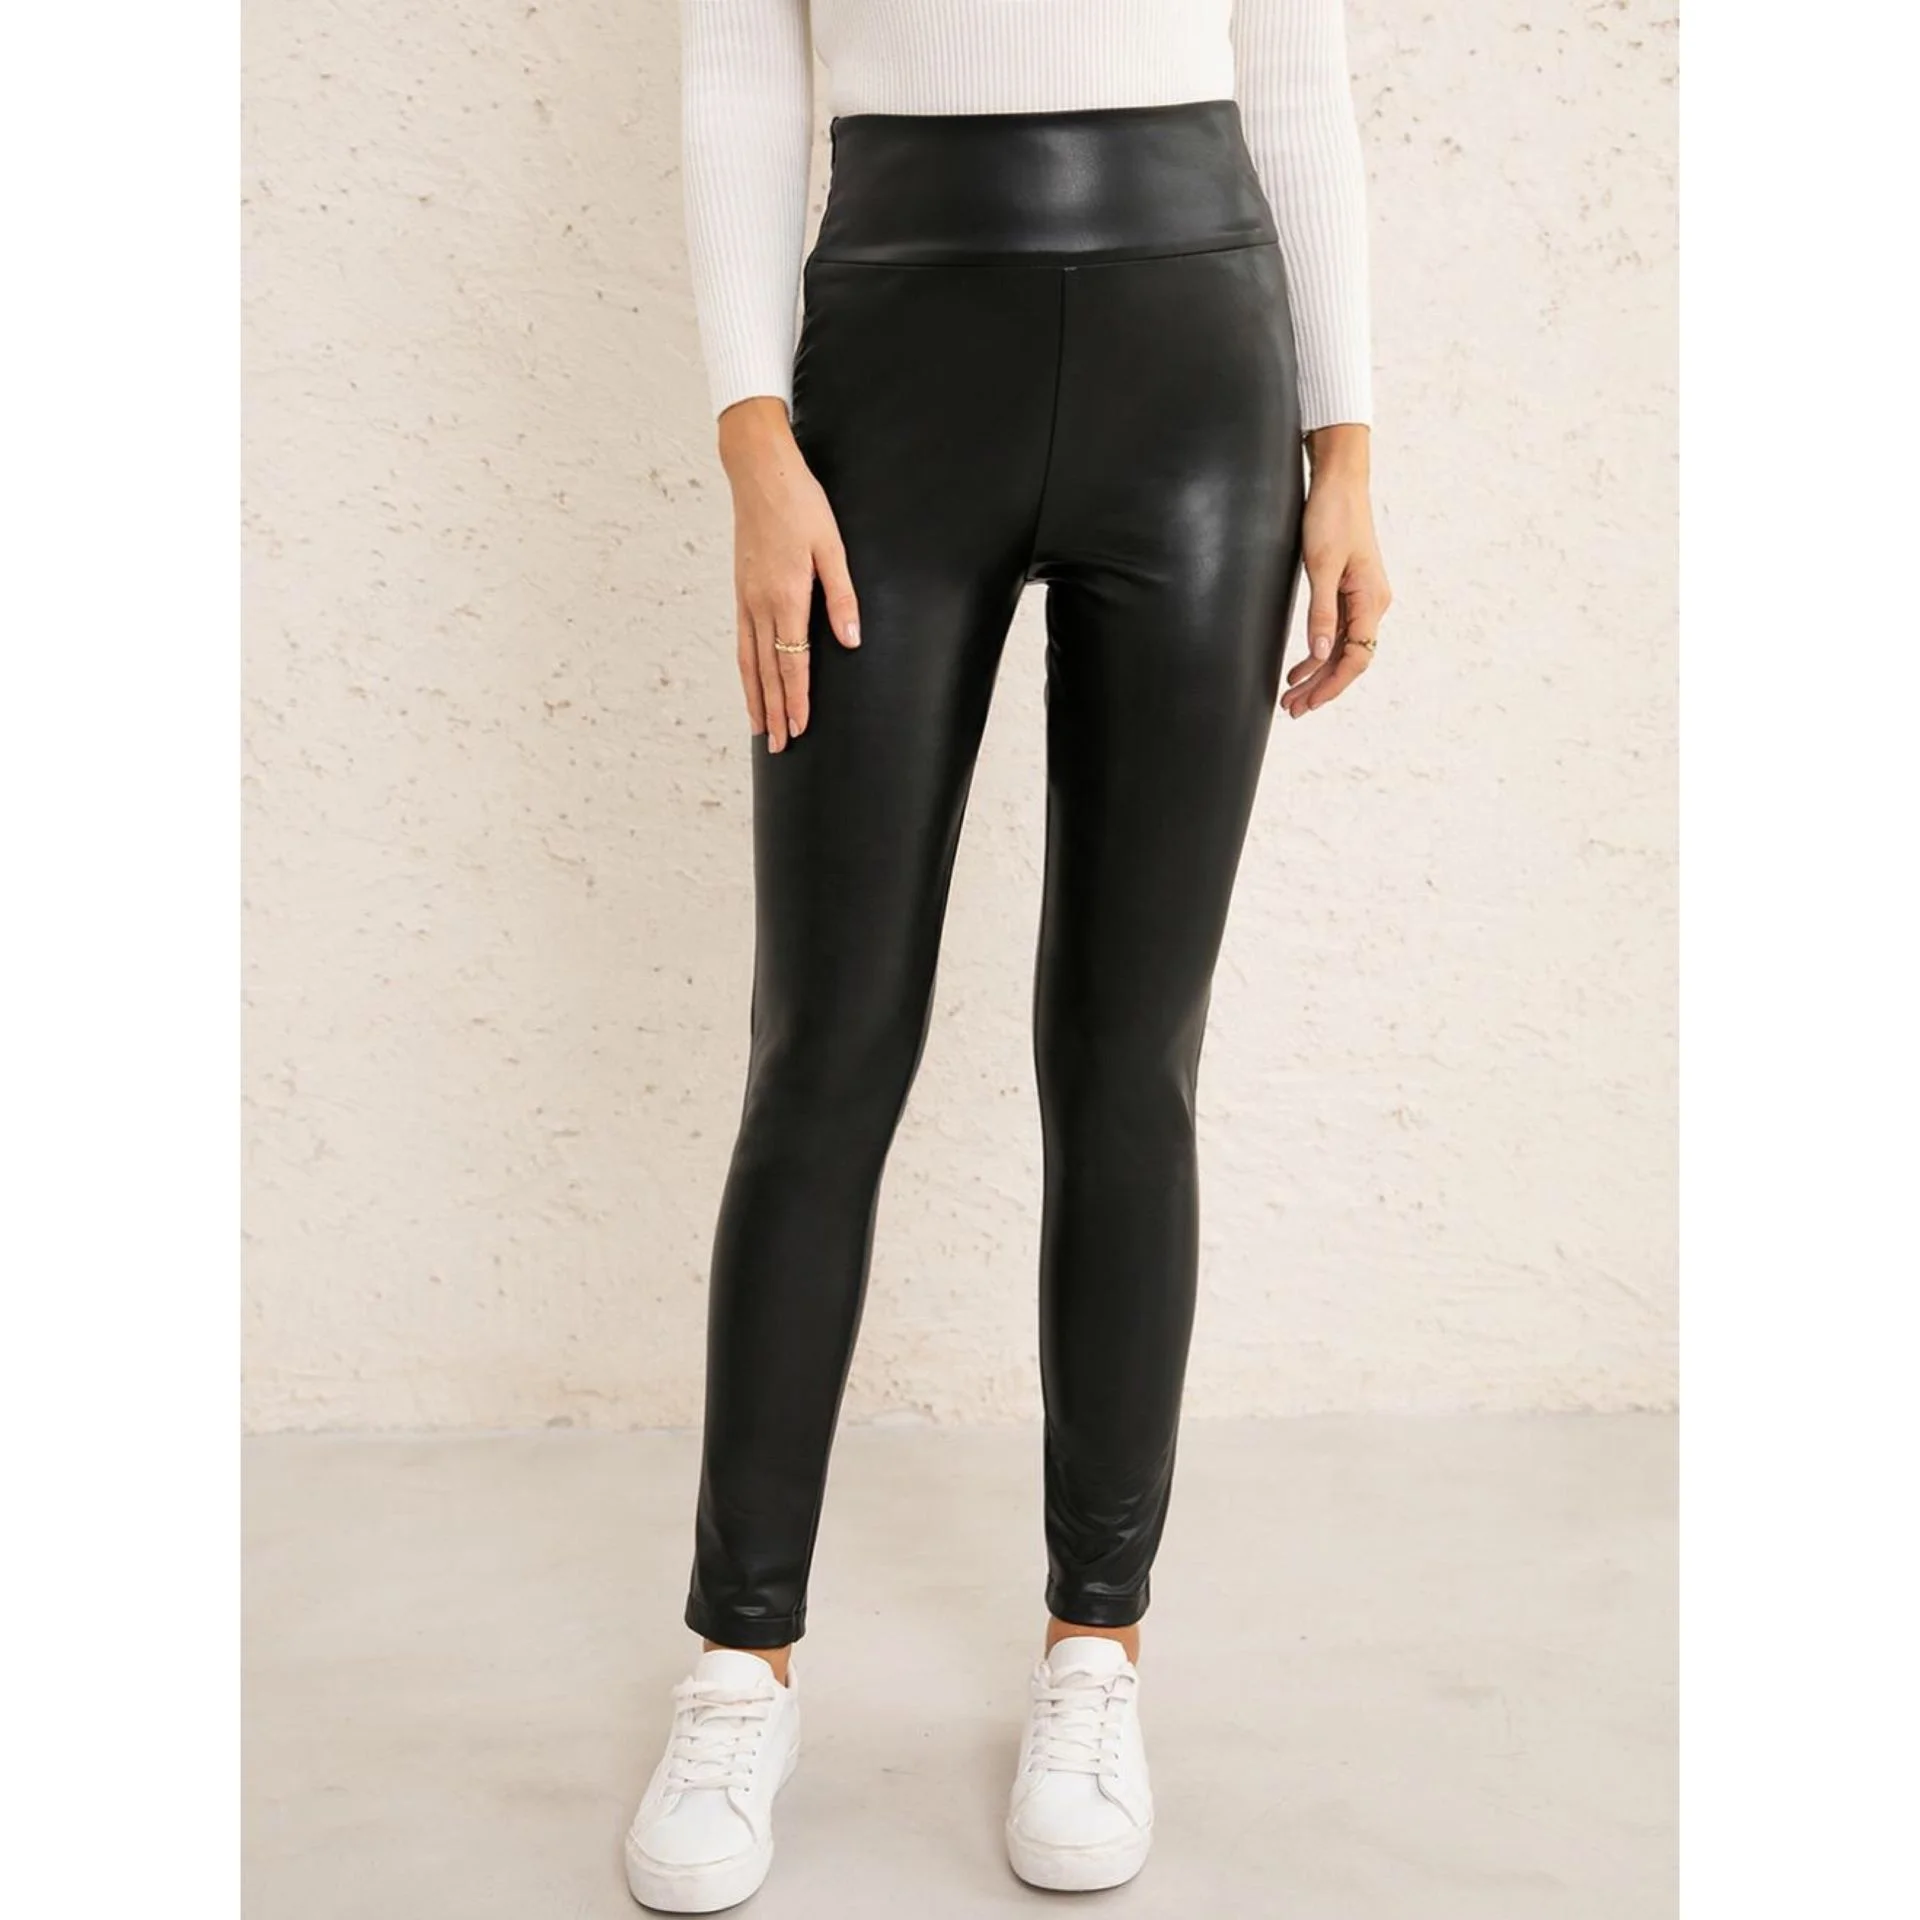 

Free Shipping T663 Casual fashion women's trousers 2021 high waist elasticity slim-fitting tight PU trouser solid elastic waist